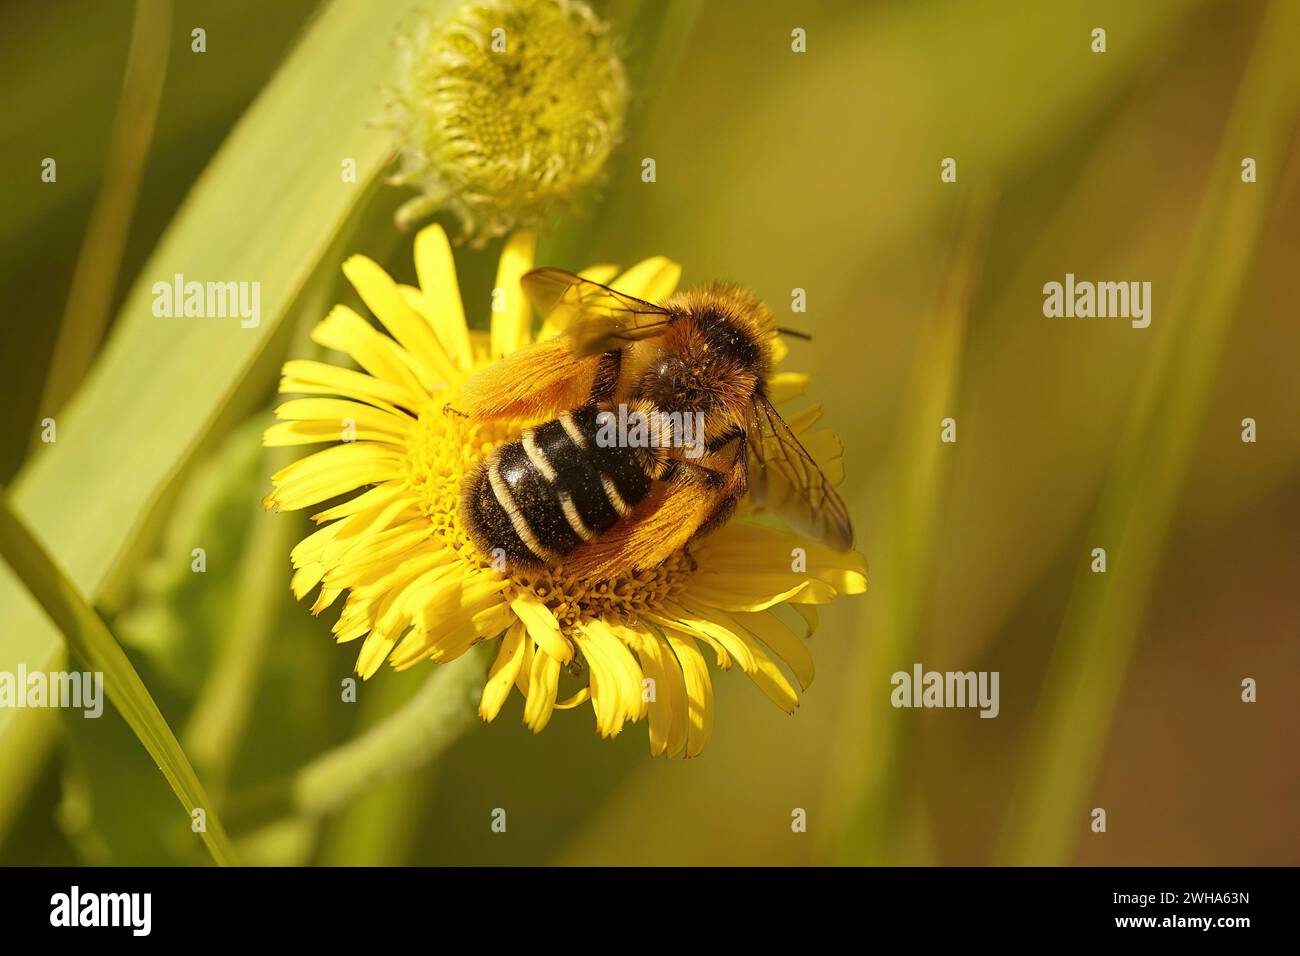 Natural closeup on a fluffy female Pantaloon bee, Dasypoda hirtipes, sitting on a yellow flower Stock Photo